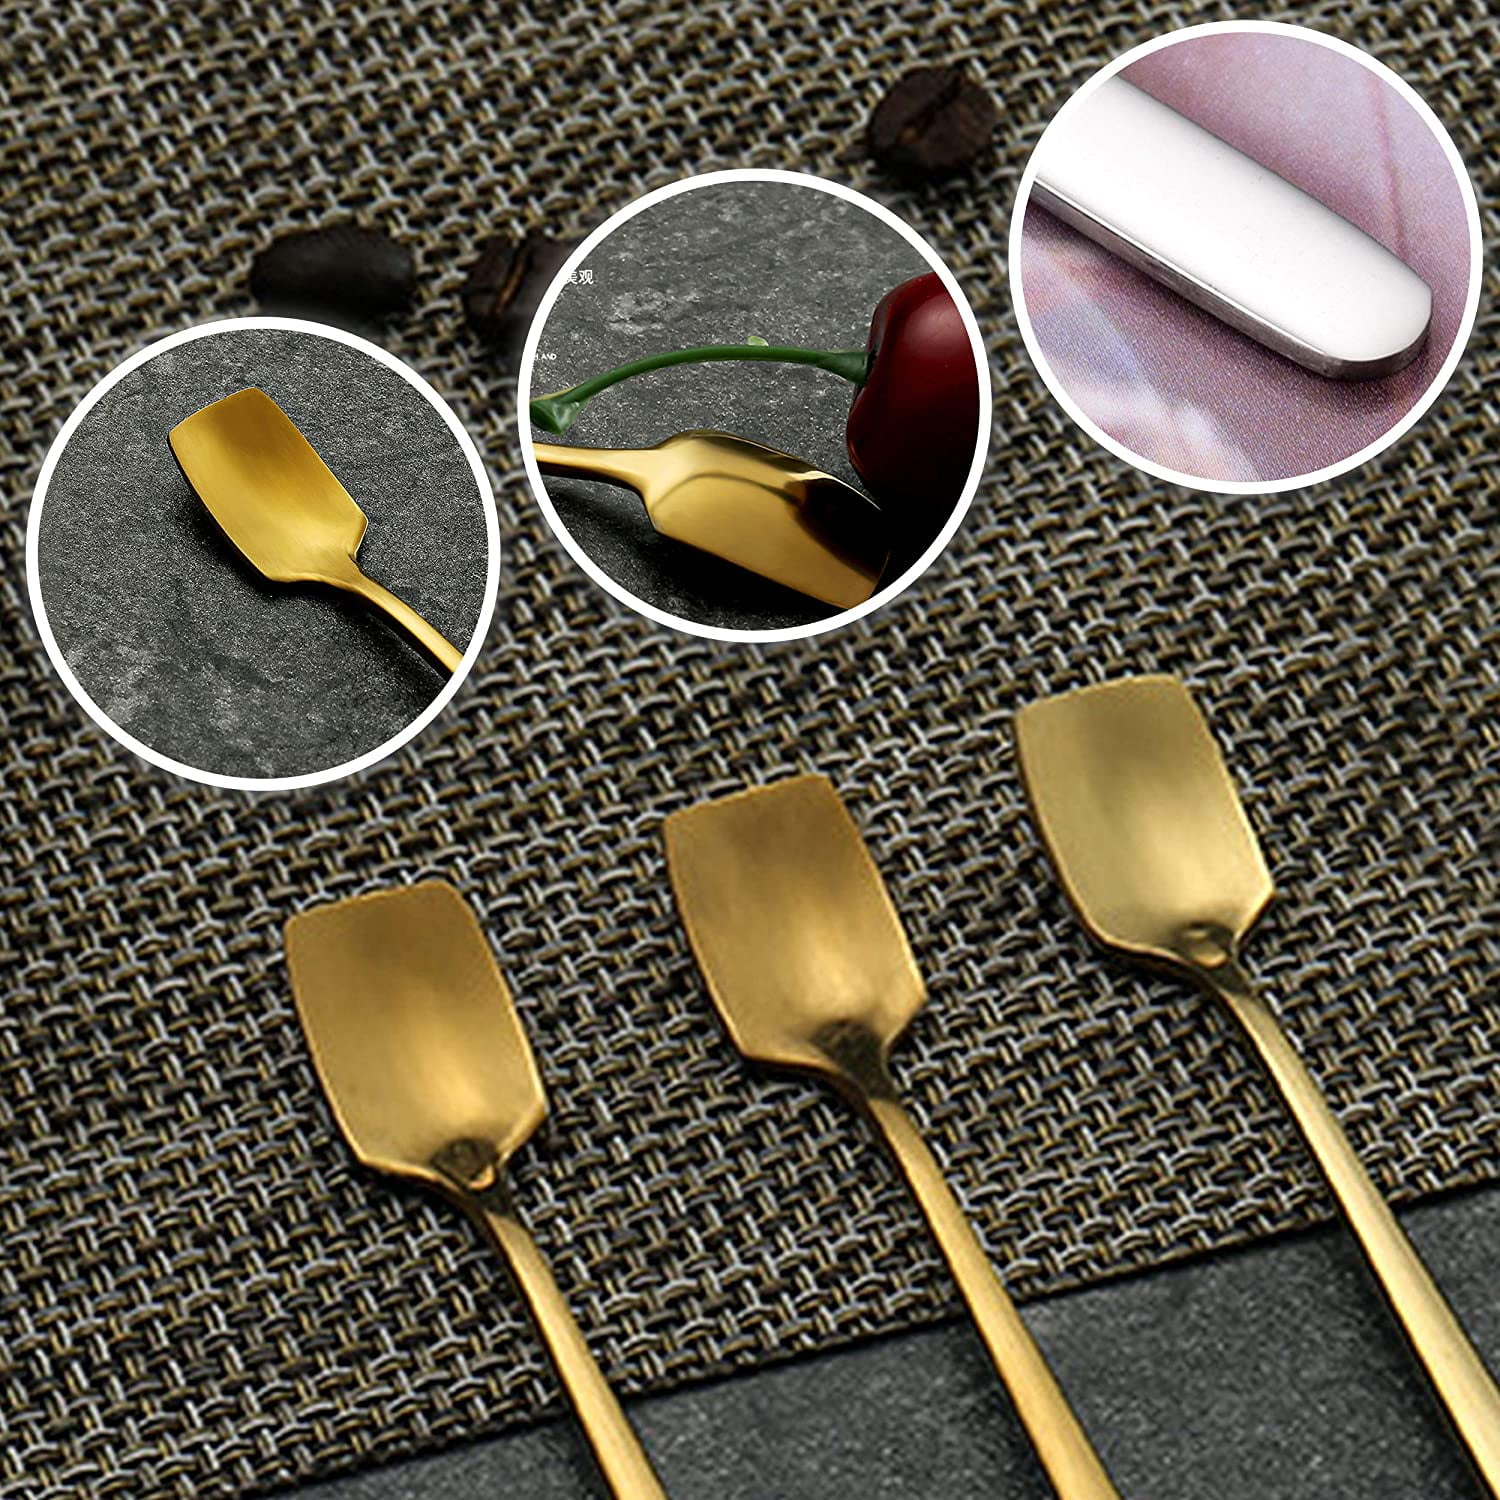 Popvcly Stainless Steel Soup Spoons Mixing Spoons, Iced Teaspoons, Ice Cream Spoon,Cocktail Stirring Spoons, Size: One Size